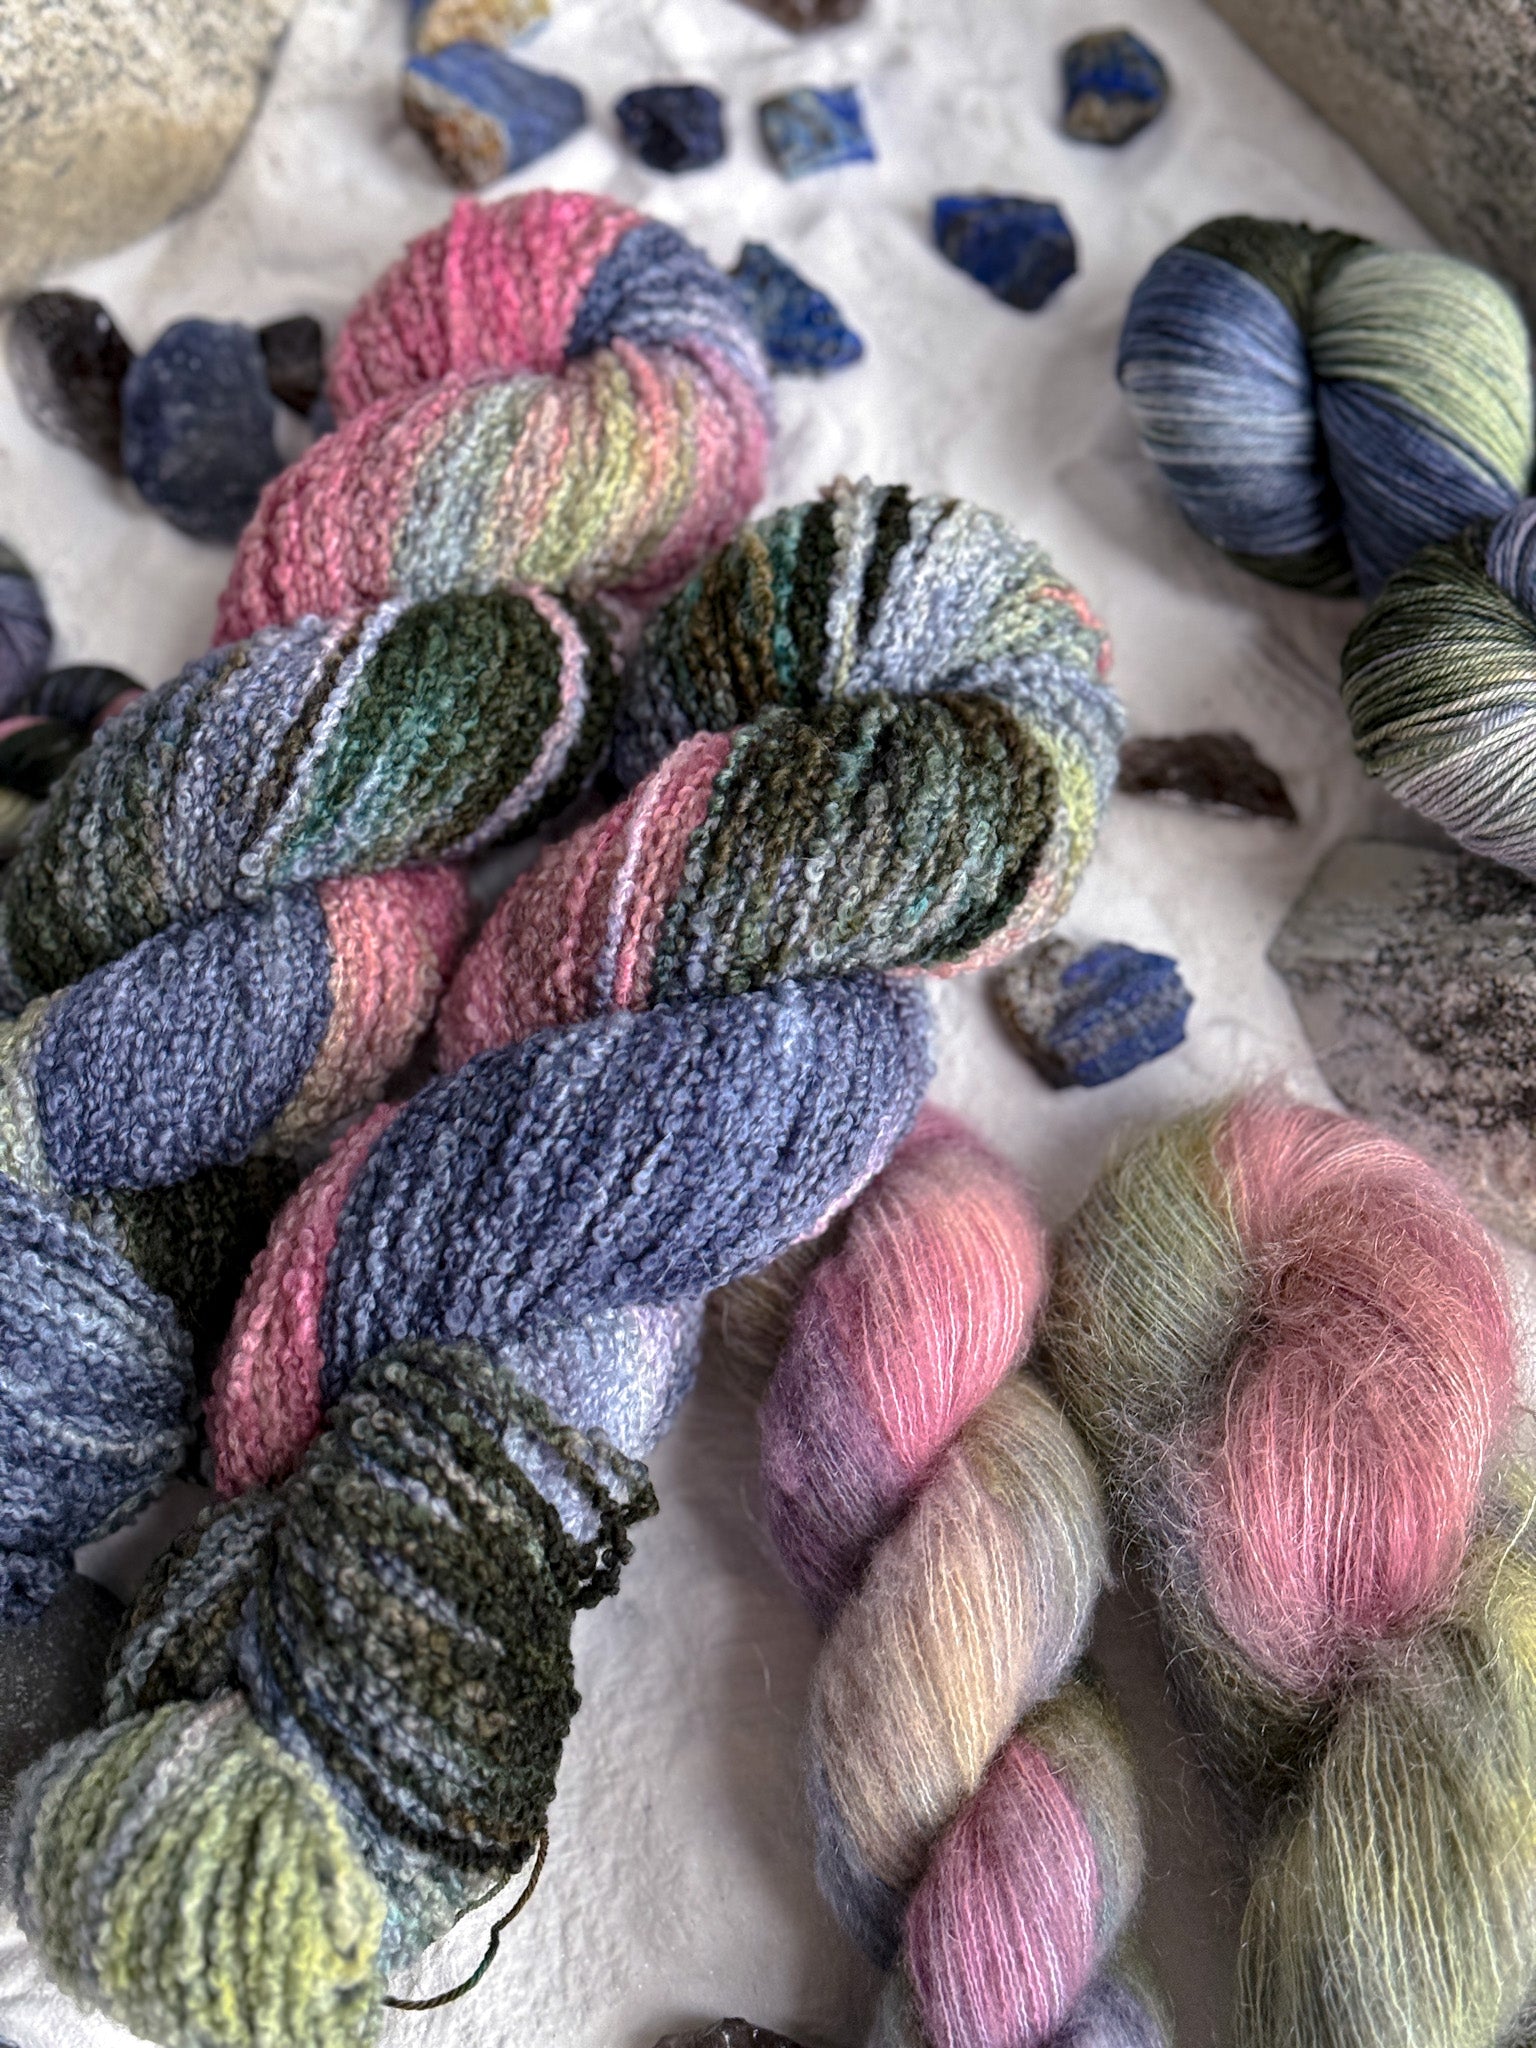 Qing Fibre - Indie Hand-Dyed Yarn and Knitting Patterns